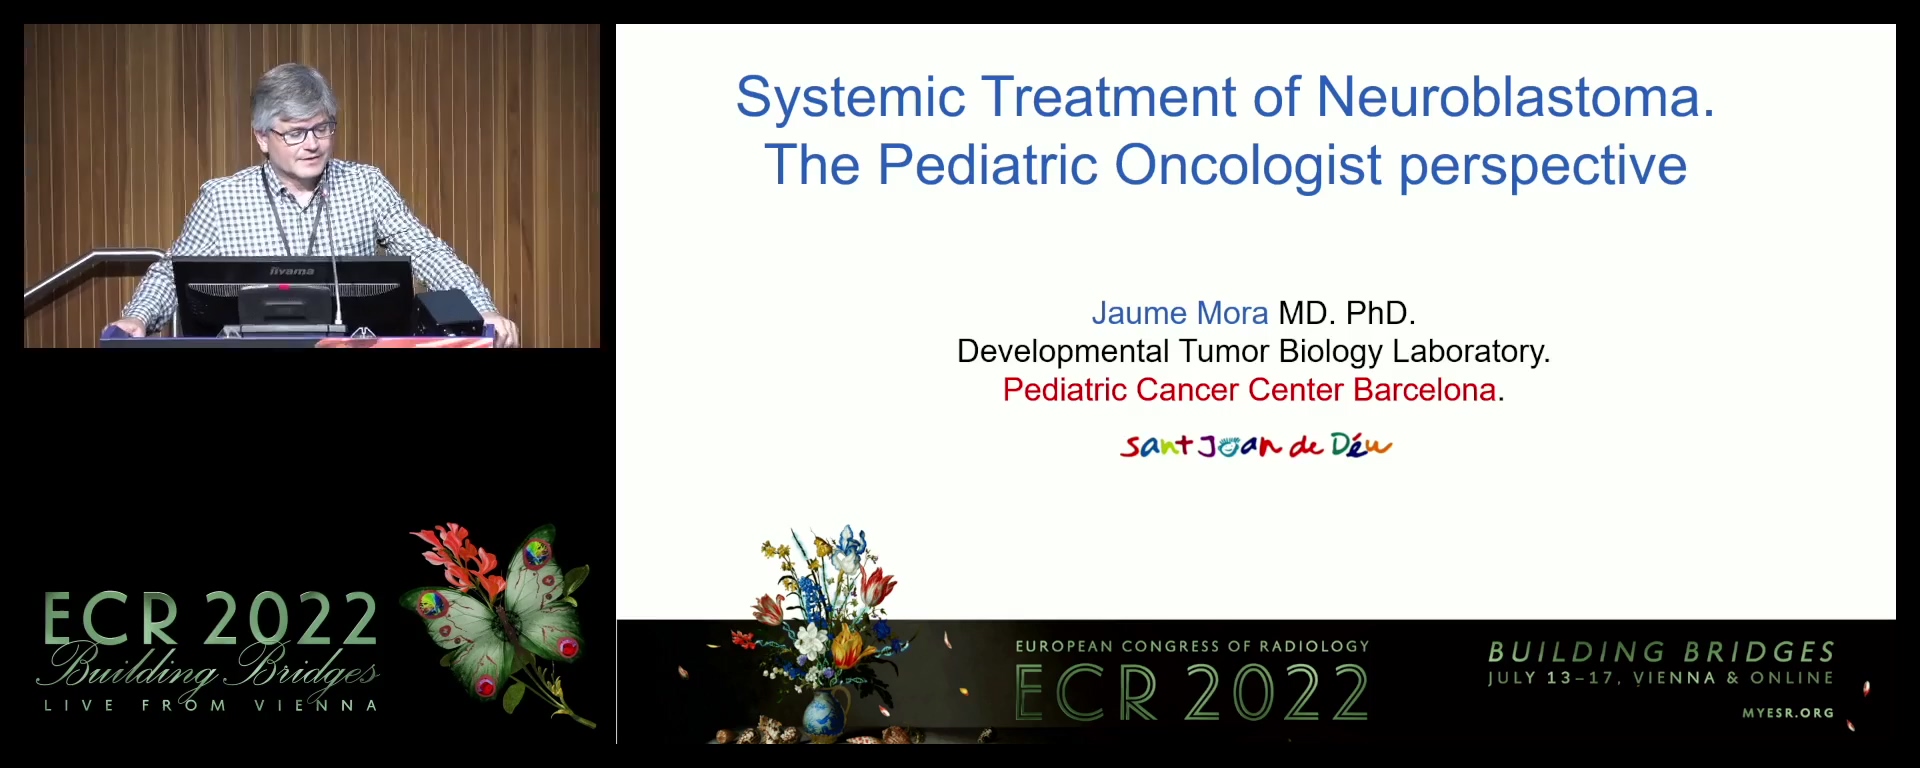 Systemic treatment and radiation therapy of neuroblastoma: the oncologist's perspective - Jaume Mora, Barcelona / ES